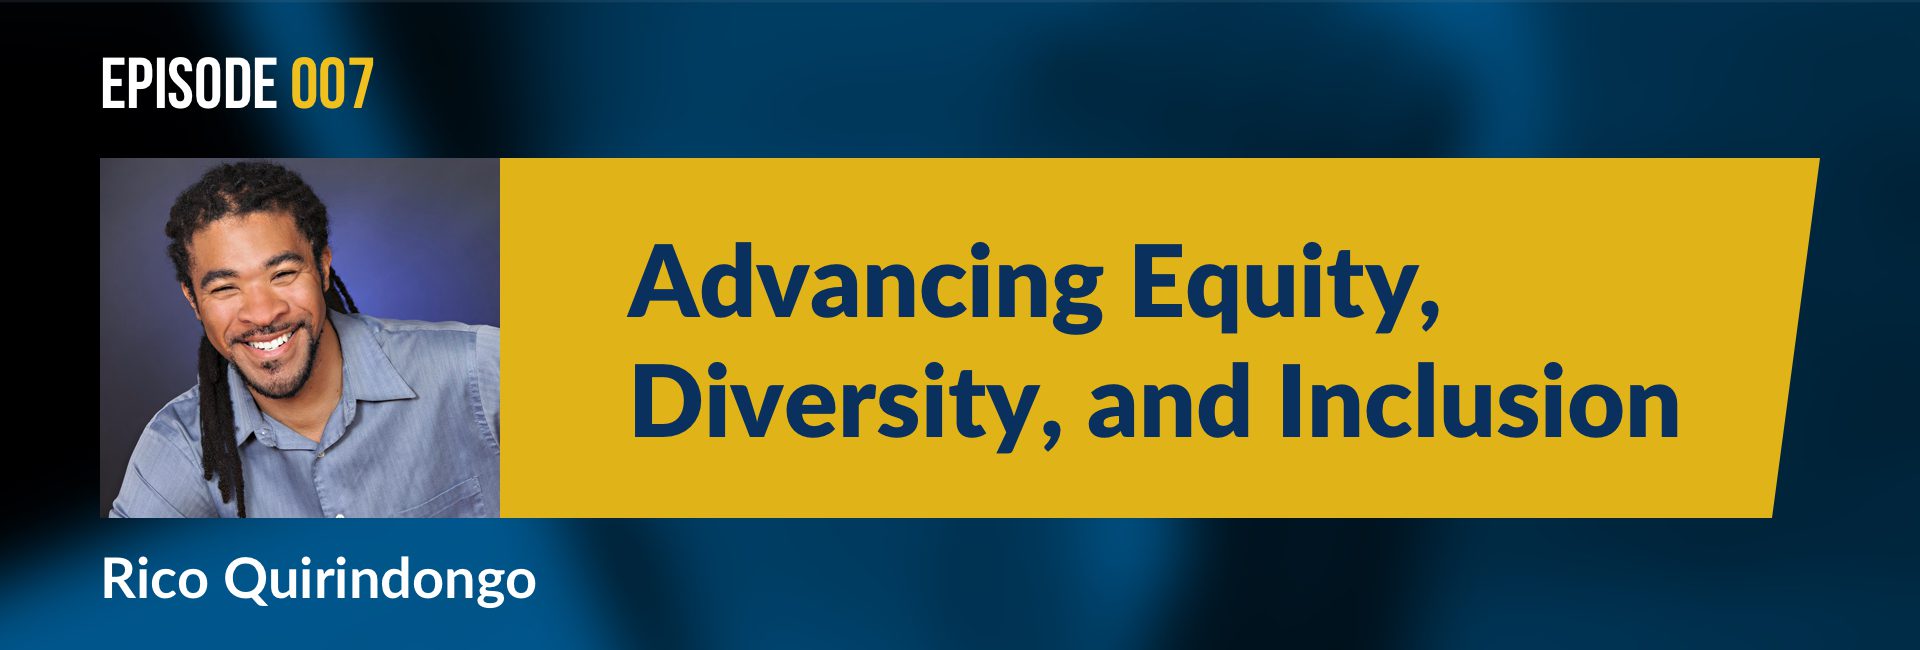 Episode 007 - Advancing Equality, Diversity, and Inclusion